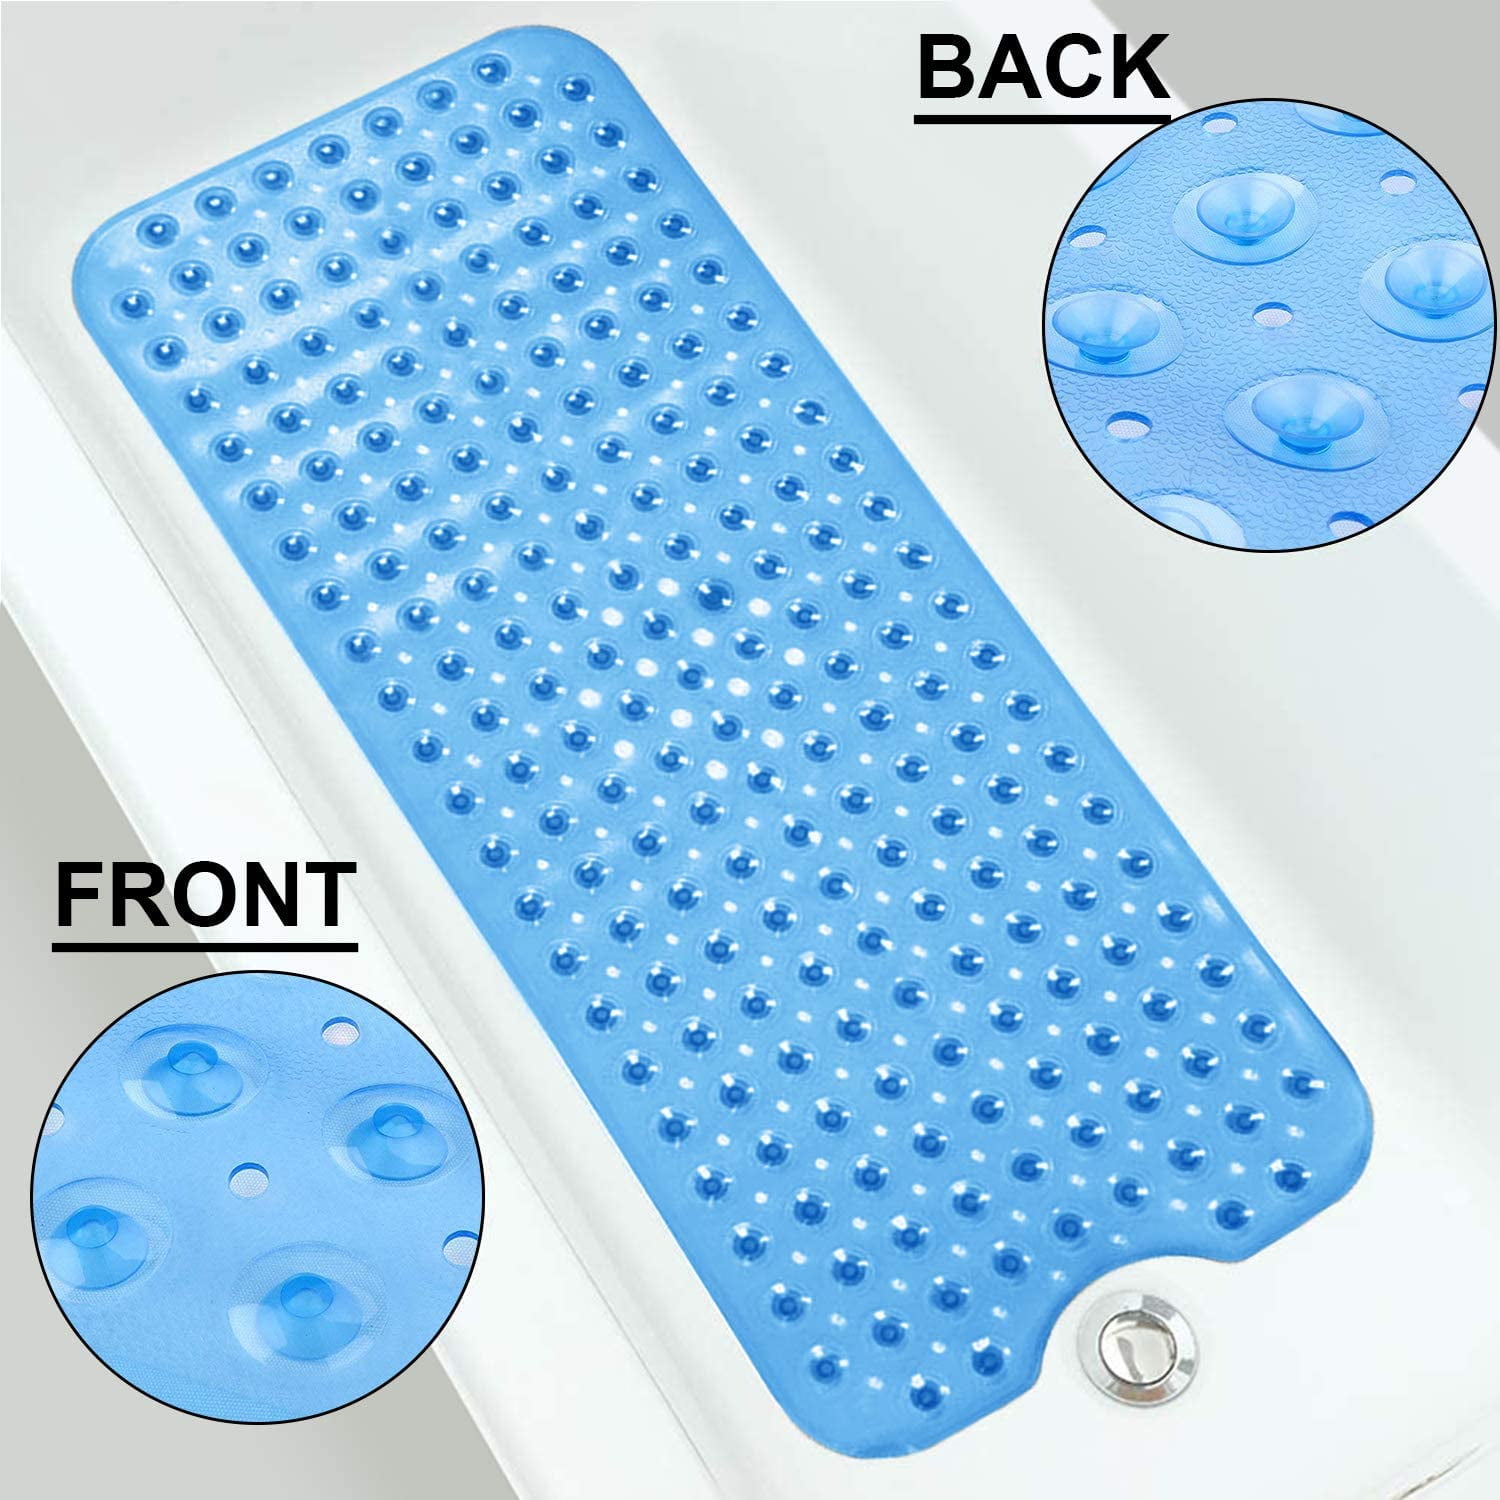 Details about   Anti-Slip Strong Suction Cup With Drain Holes,Bath Mats For Floor Massaging 2020 